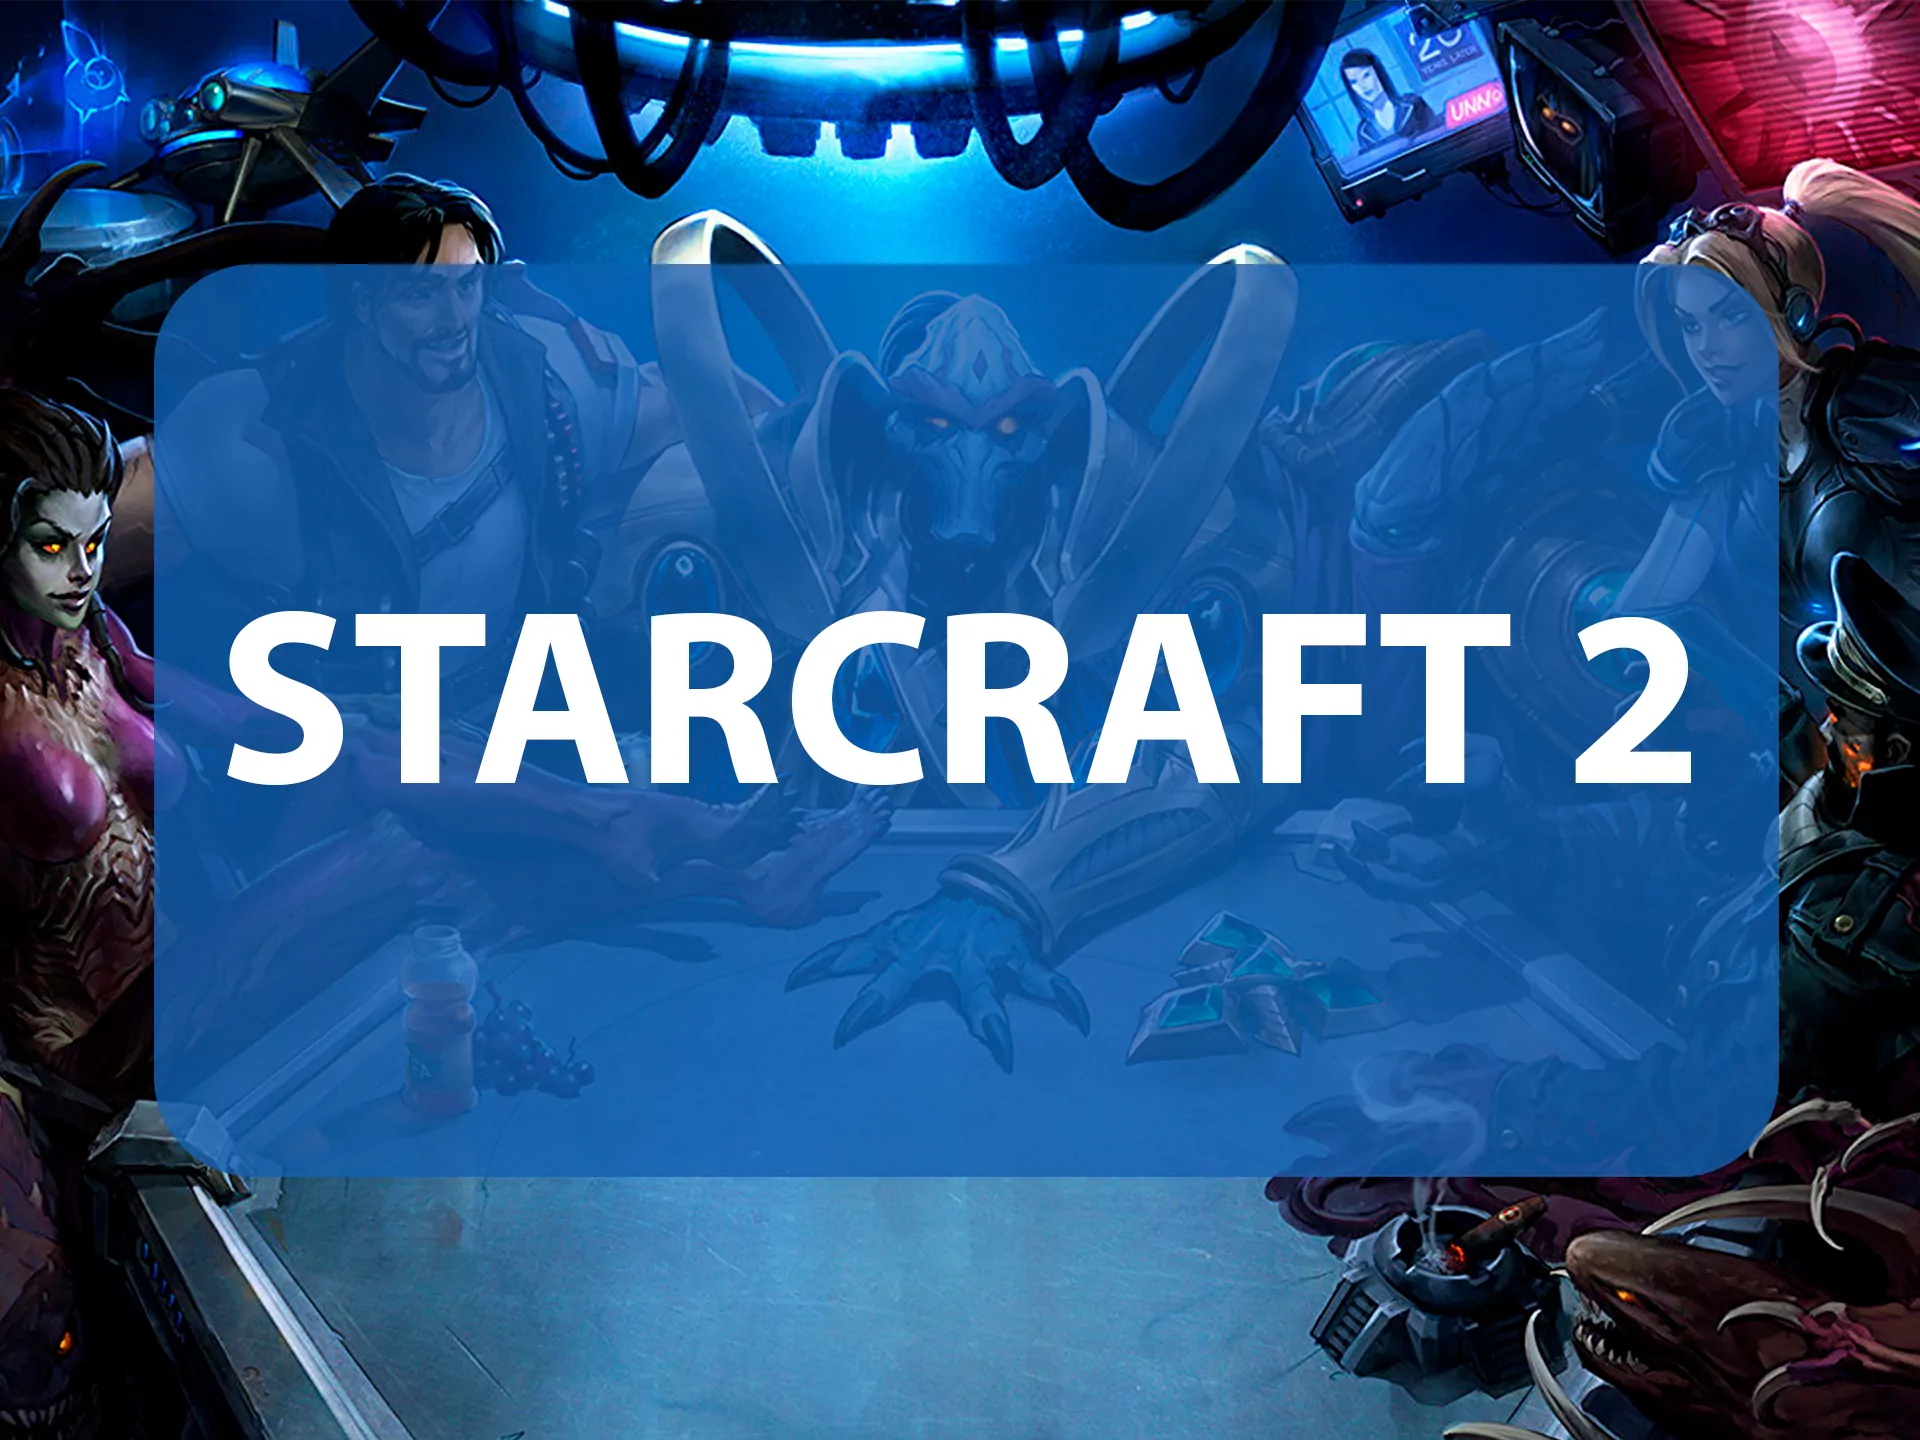 Place bets on your favorite Starcraft team.